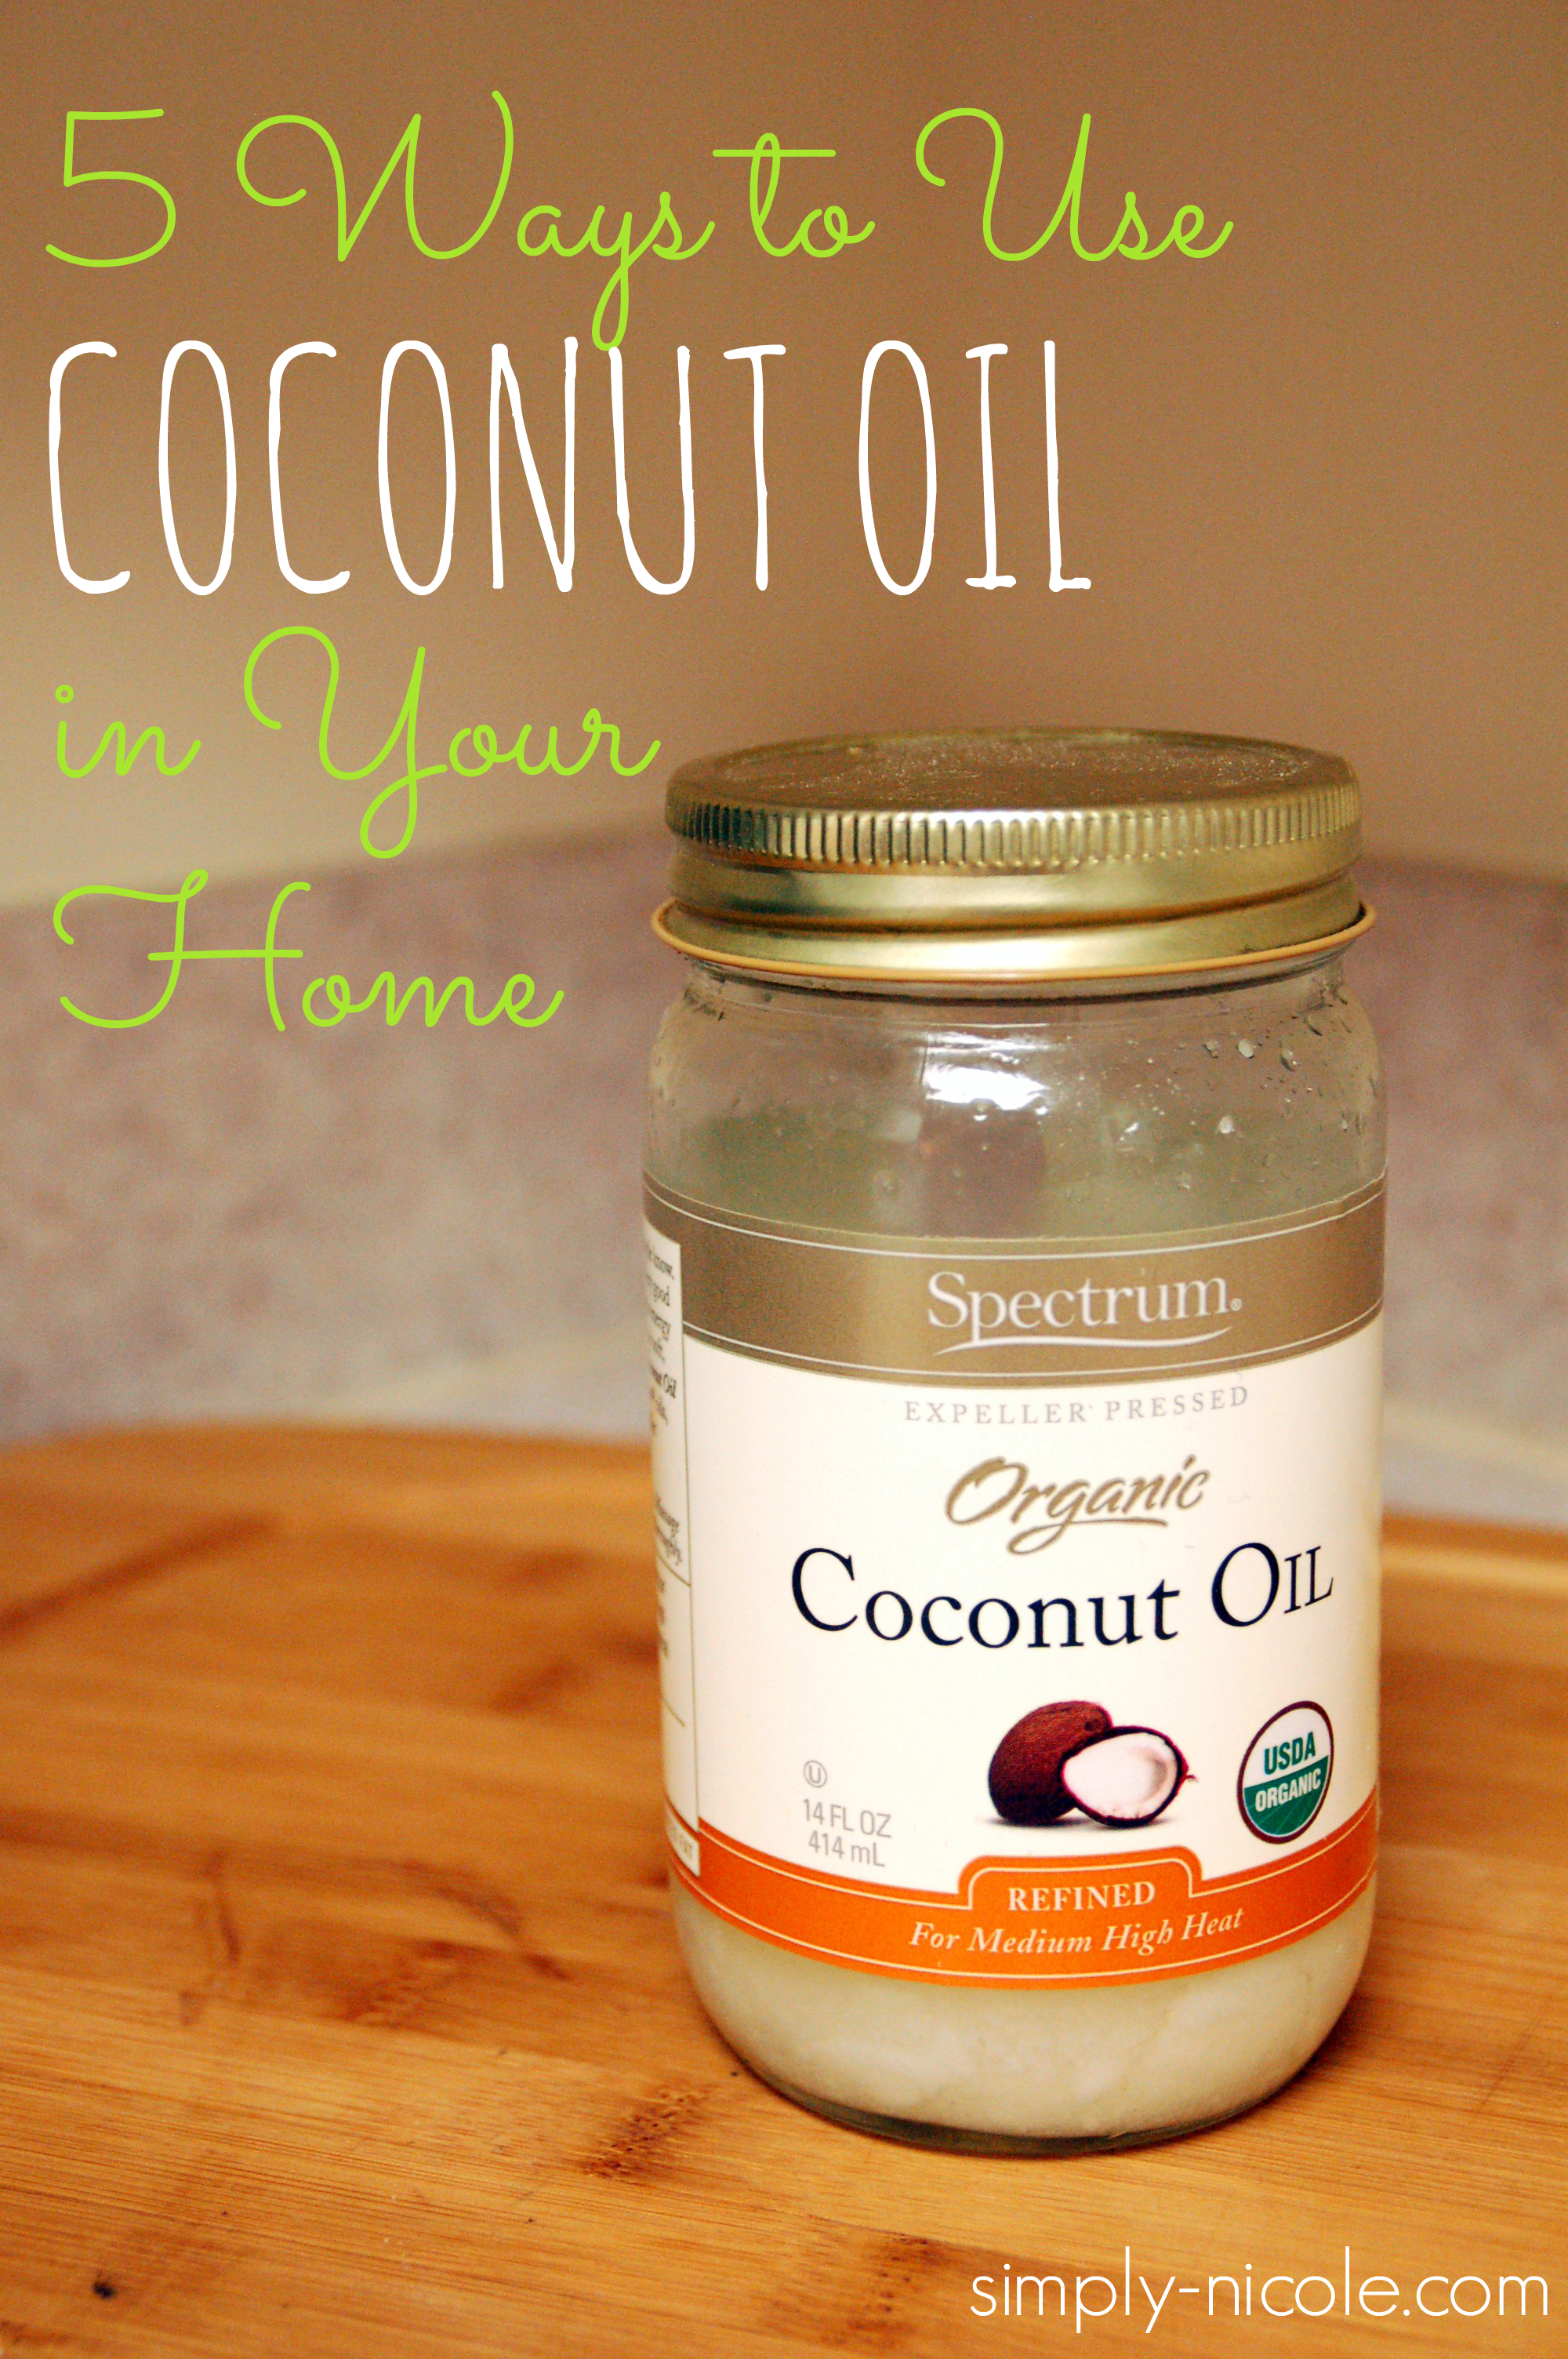 5 Ways to Use Coconut Oil in Your Home at simply-nicole.com